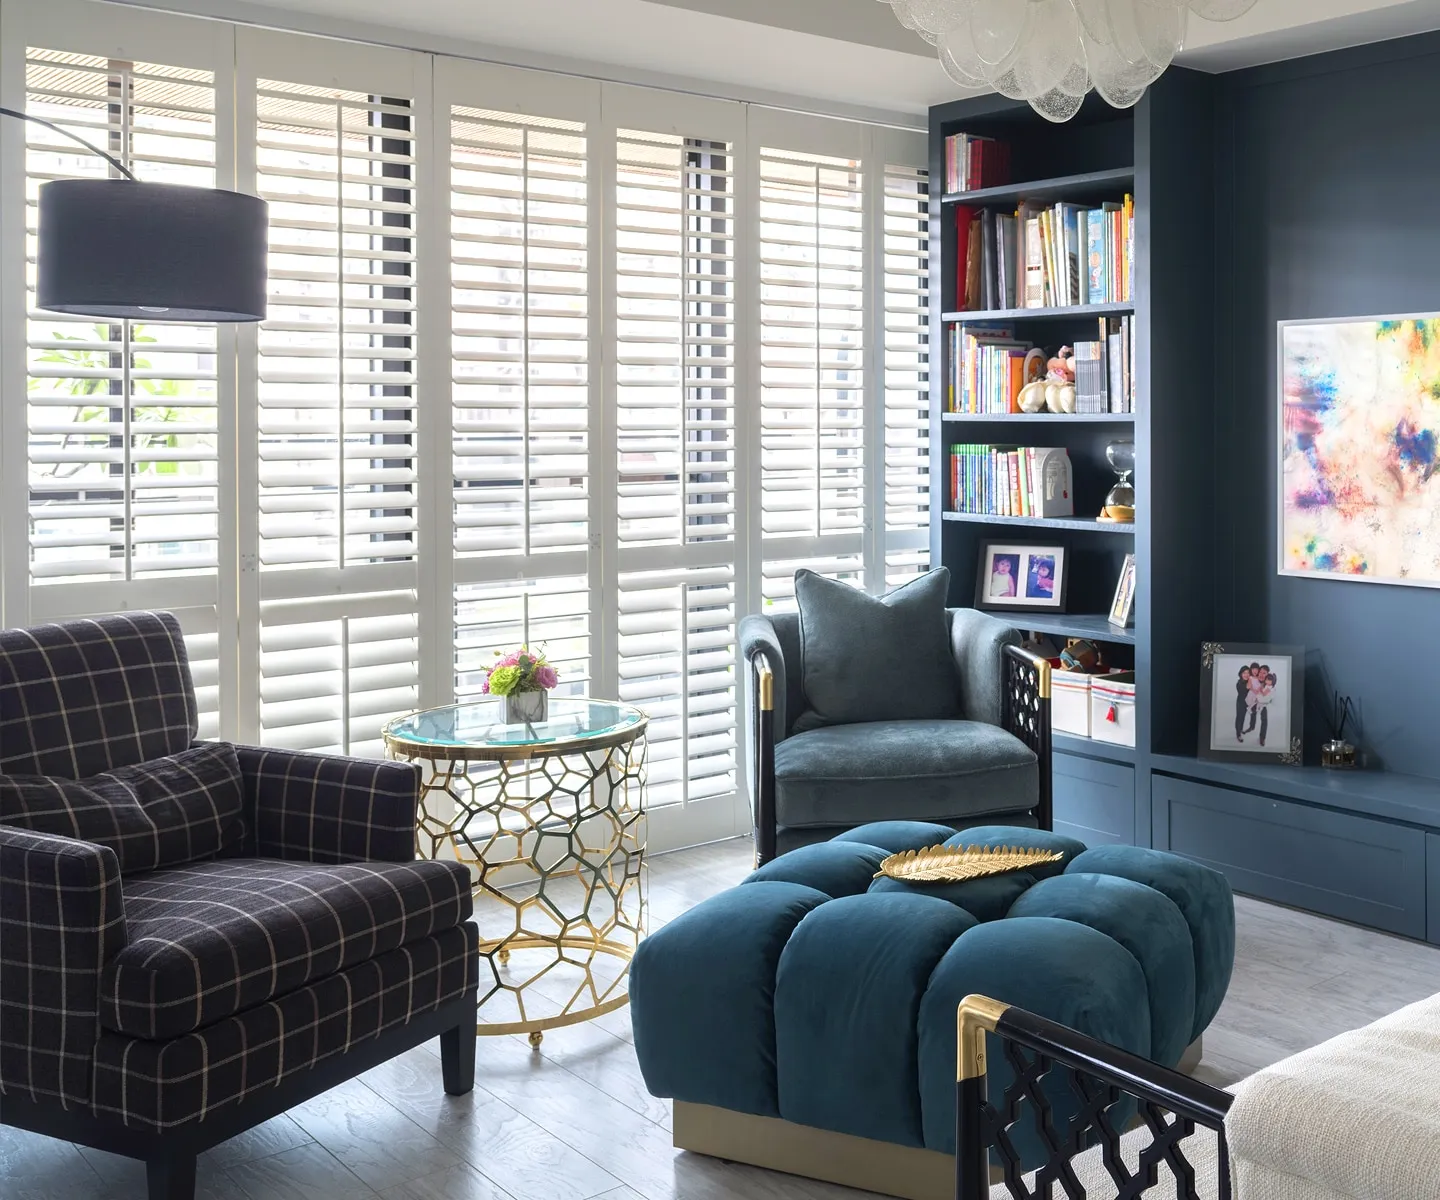 Near McLean, VA, a Tranquil reading nook with timeless Woodlore shutters